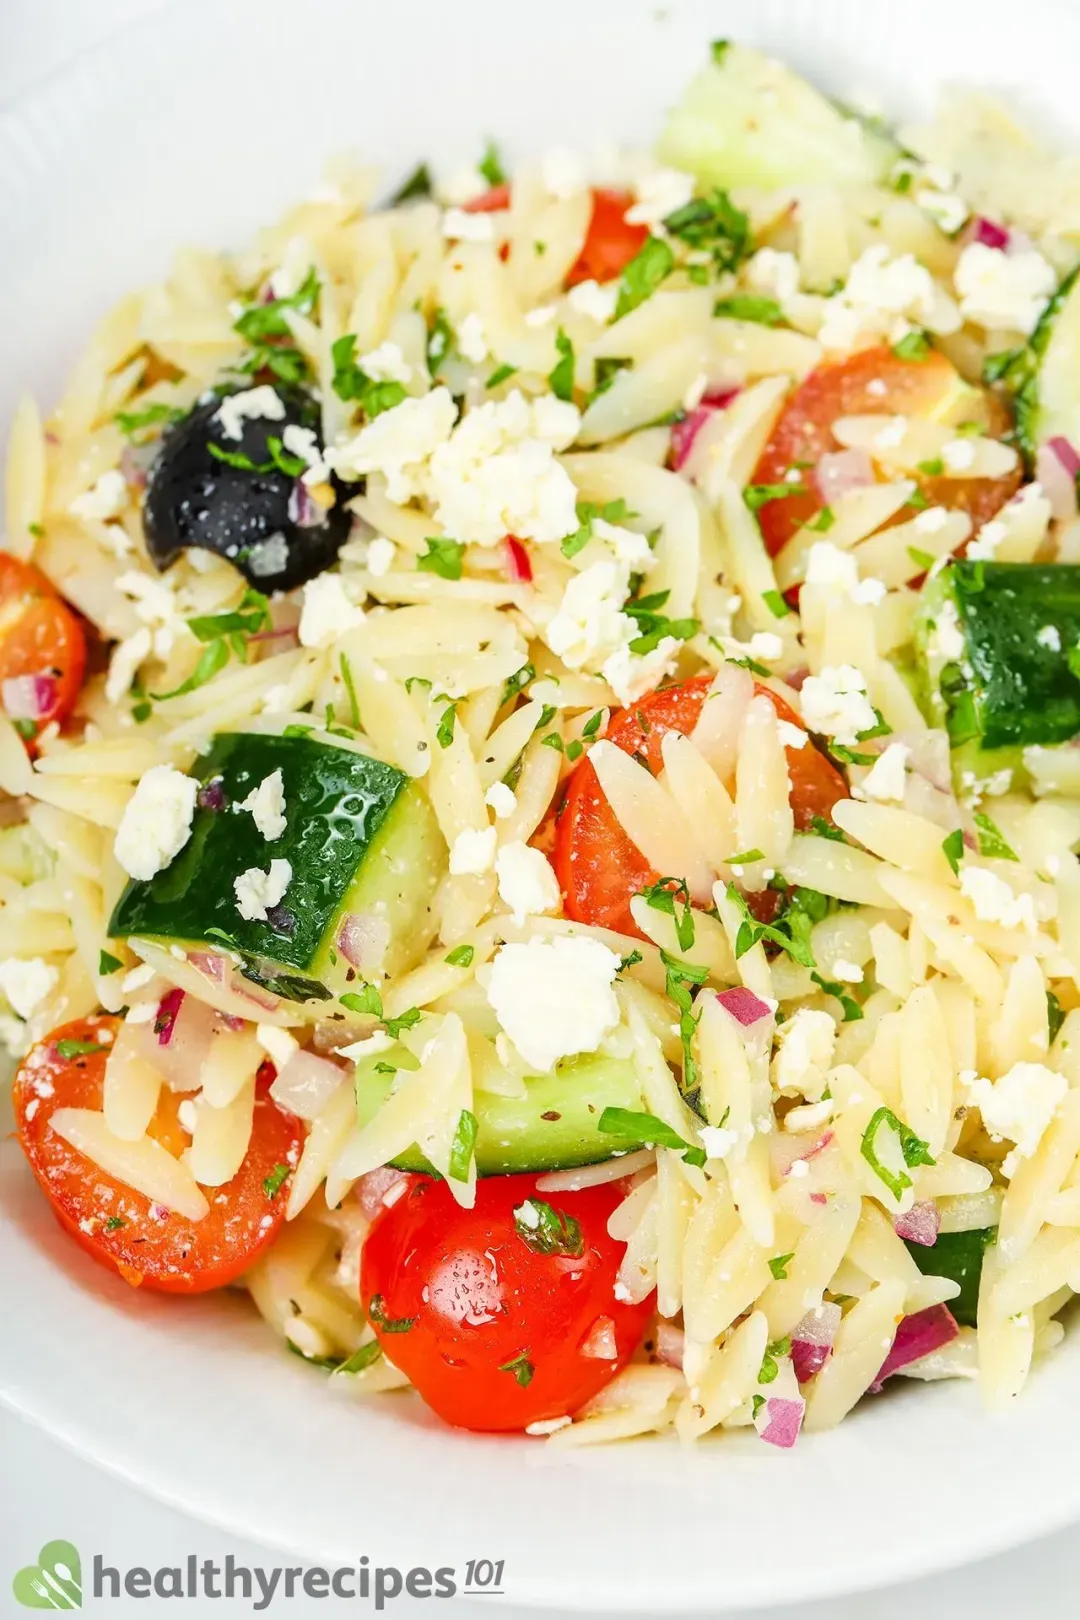 Orzo Salad With Feta: A Healthy, Heart-melting Salad for Your Sweeties.